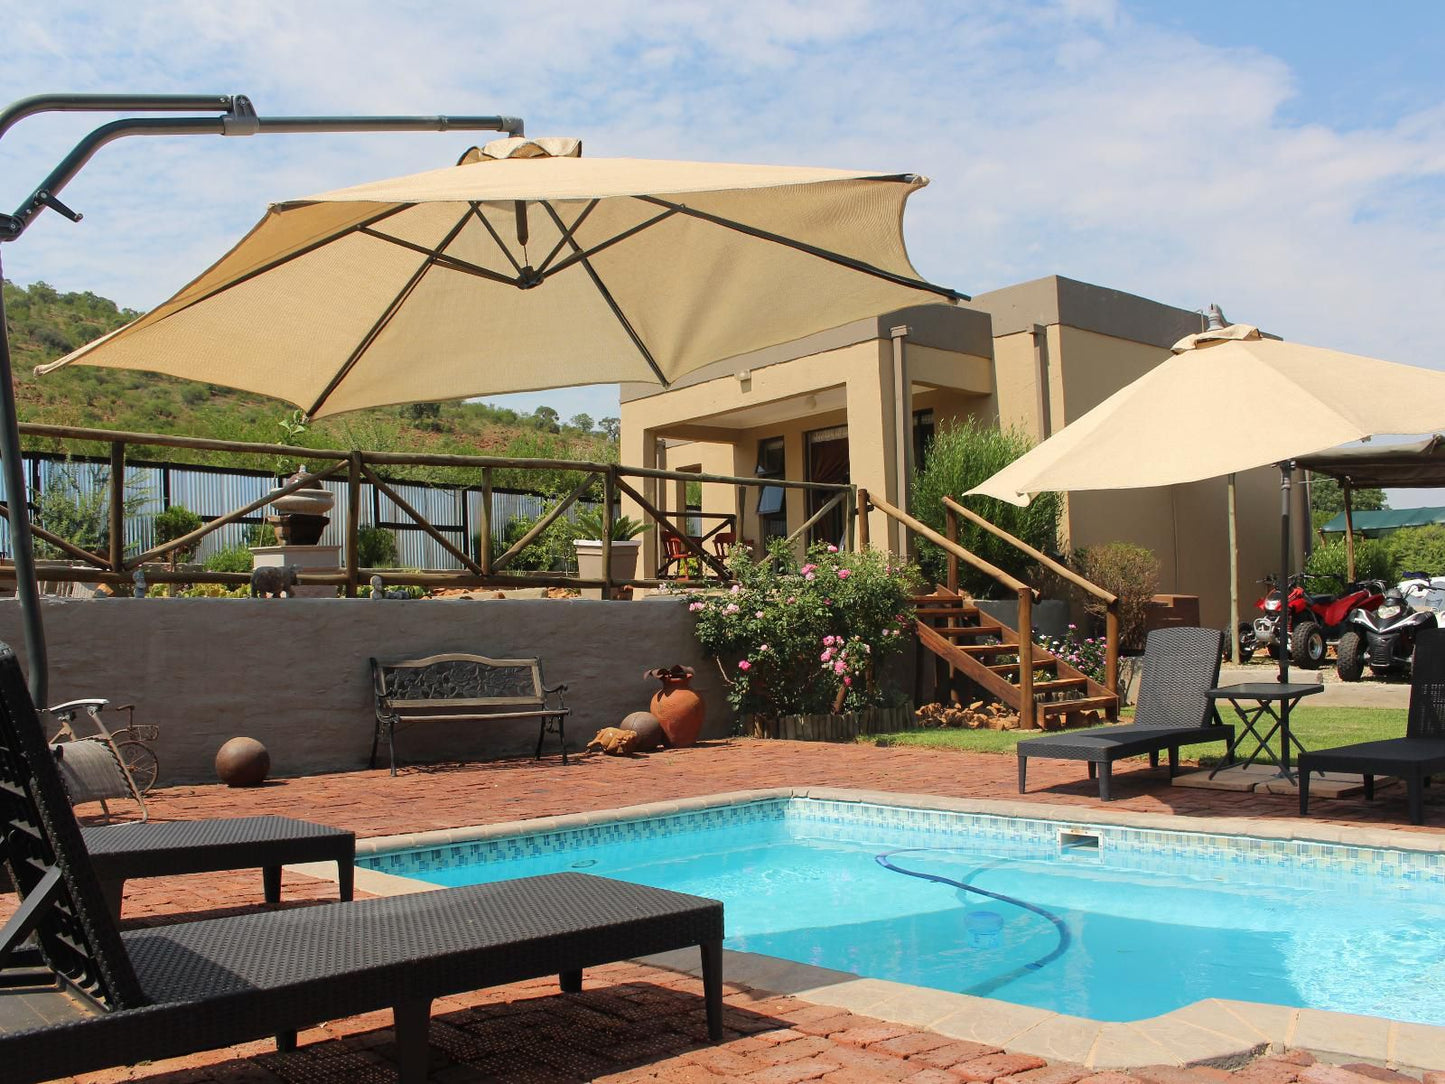 Mthembuskloof Country Lodge Ss Skosana Nature Reserve Mpumalanga South Africa Complementary Colors, Swimming Pool